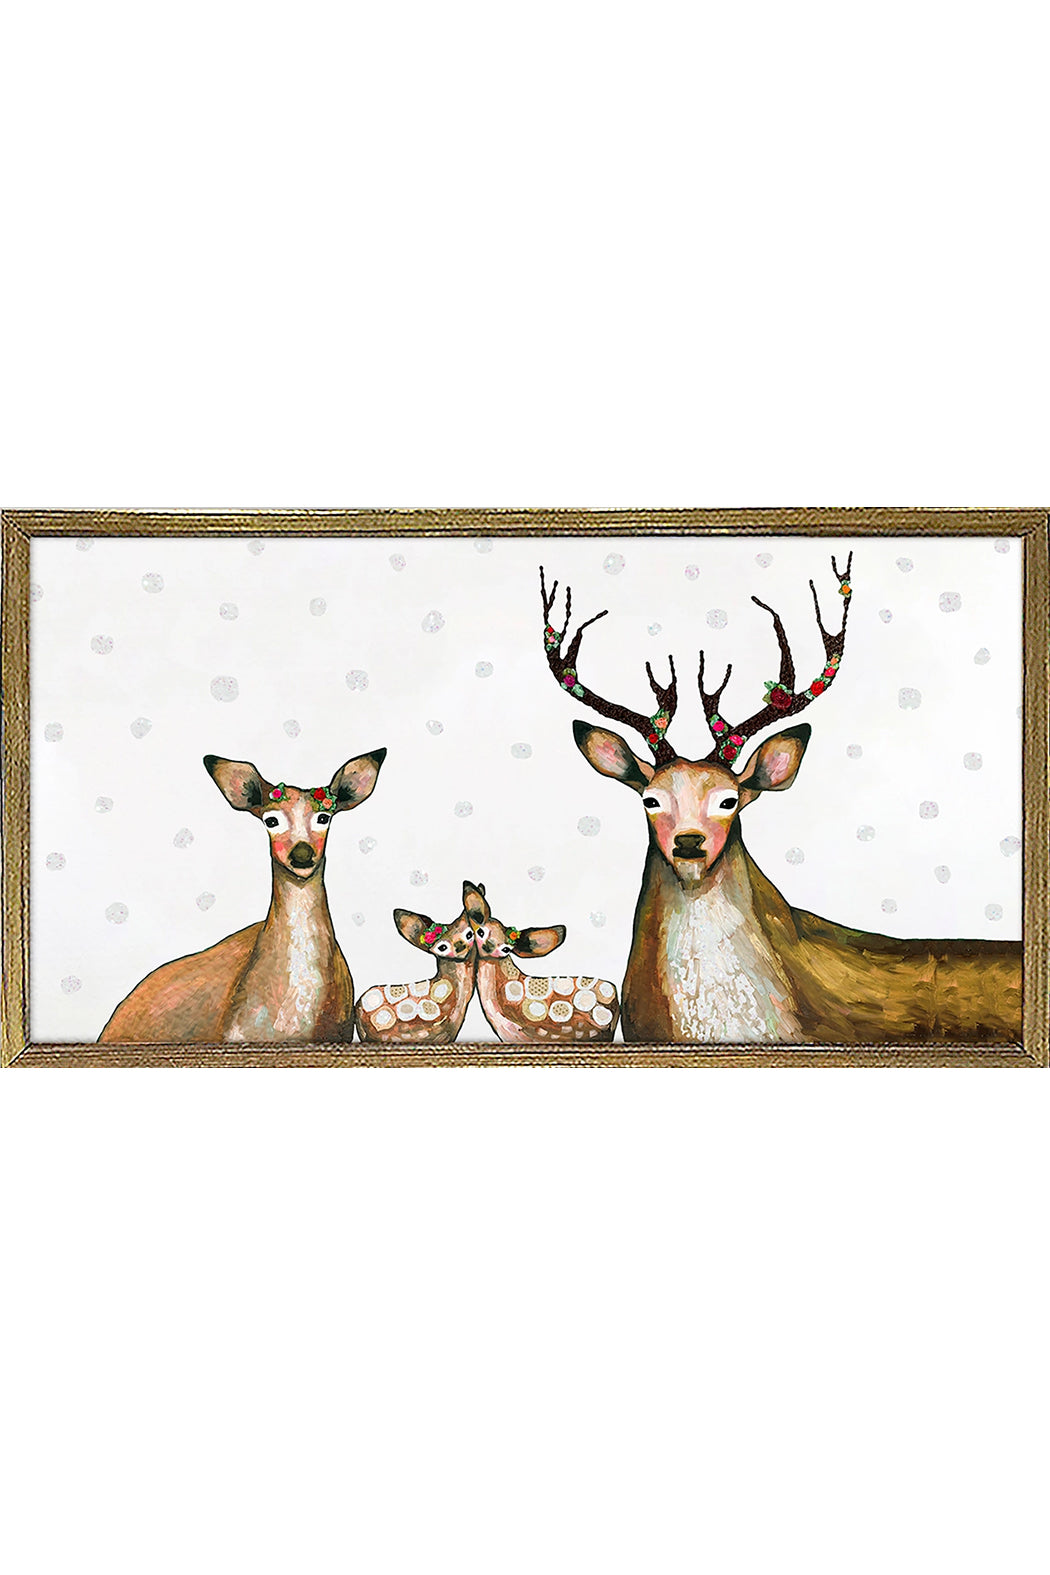 Green Box Art Holiday Flower Deer Family By Eli Halpin Embellished Canvas